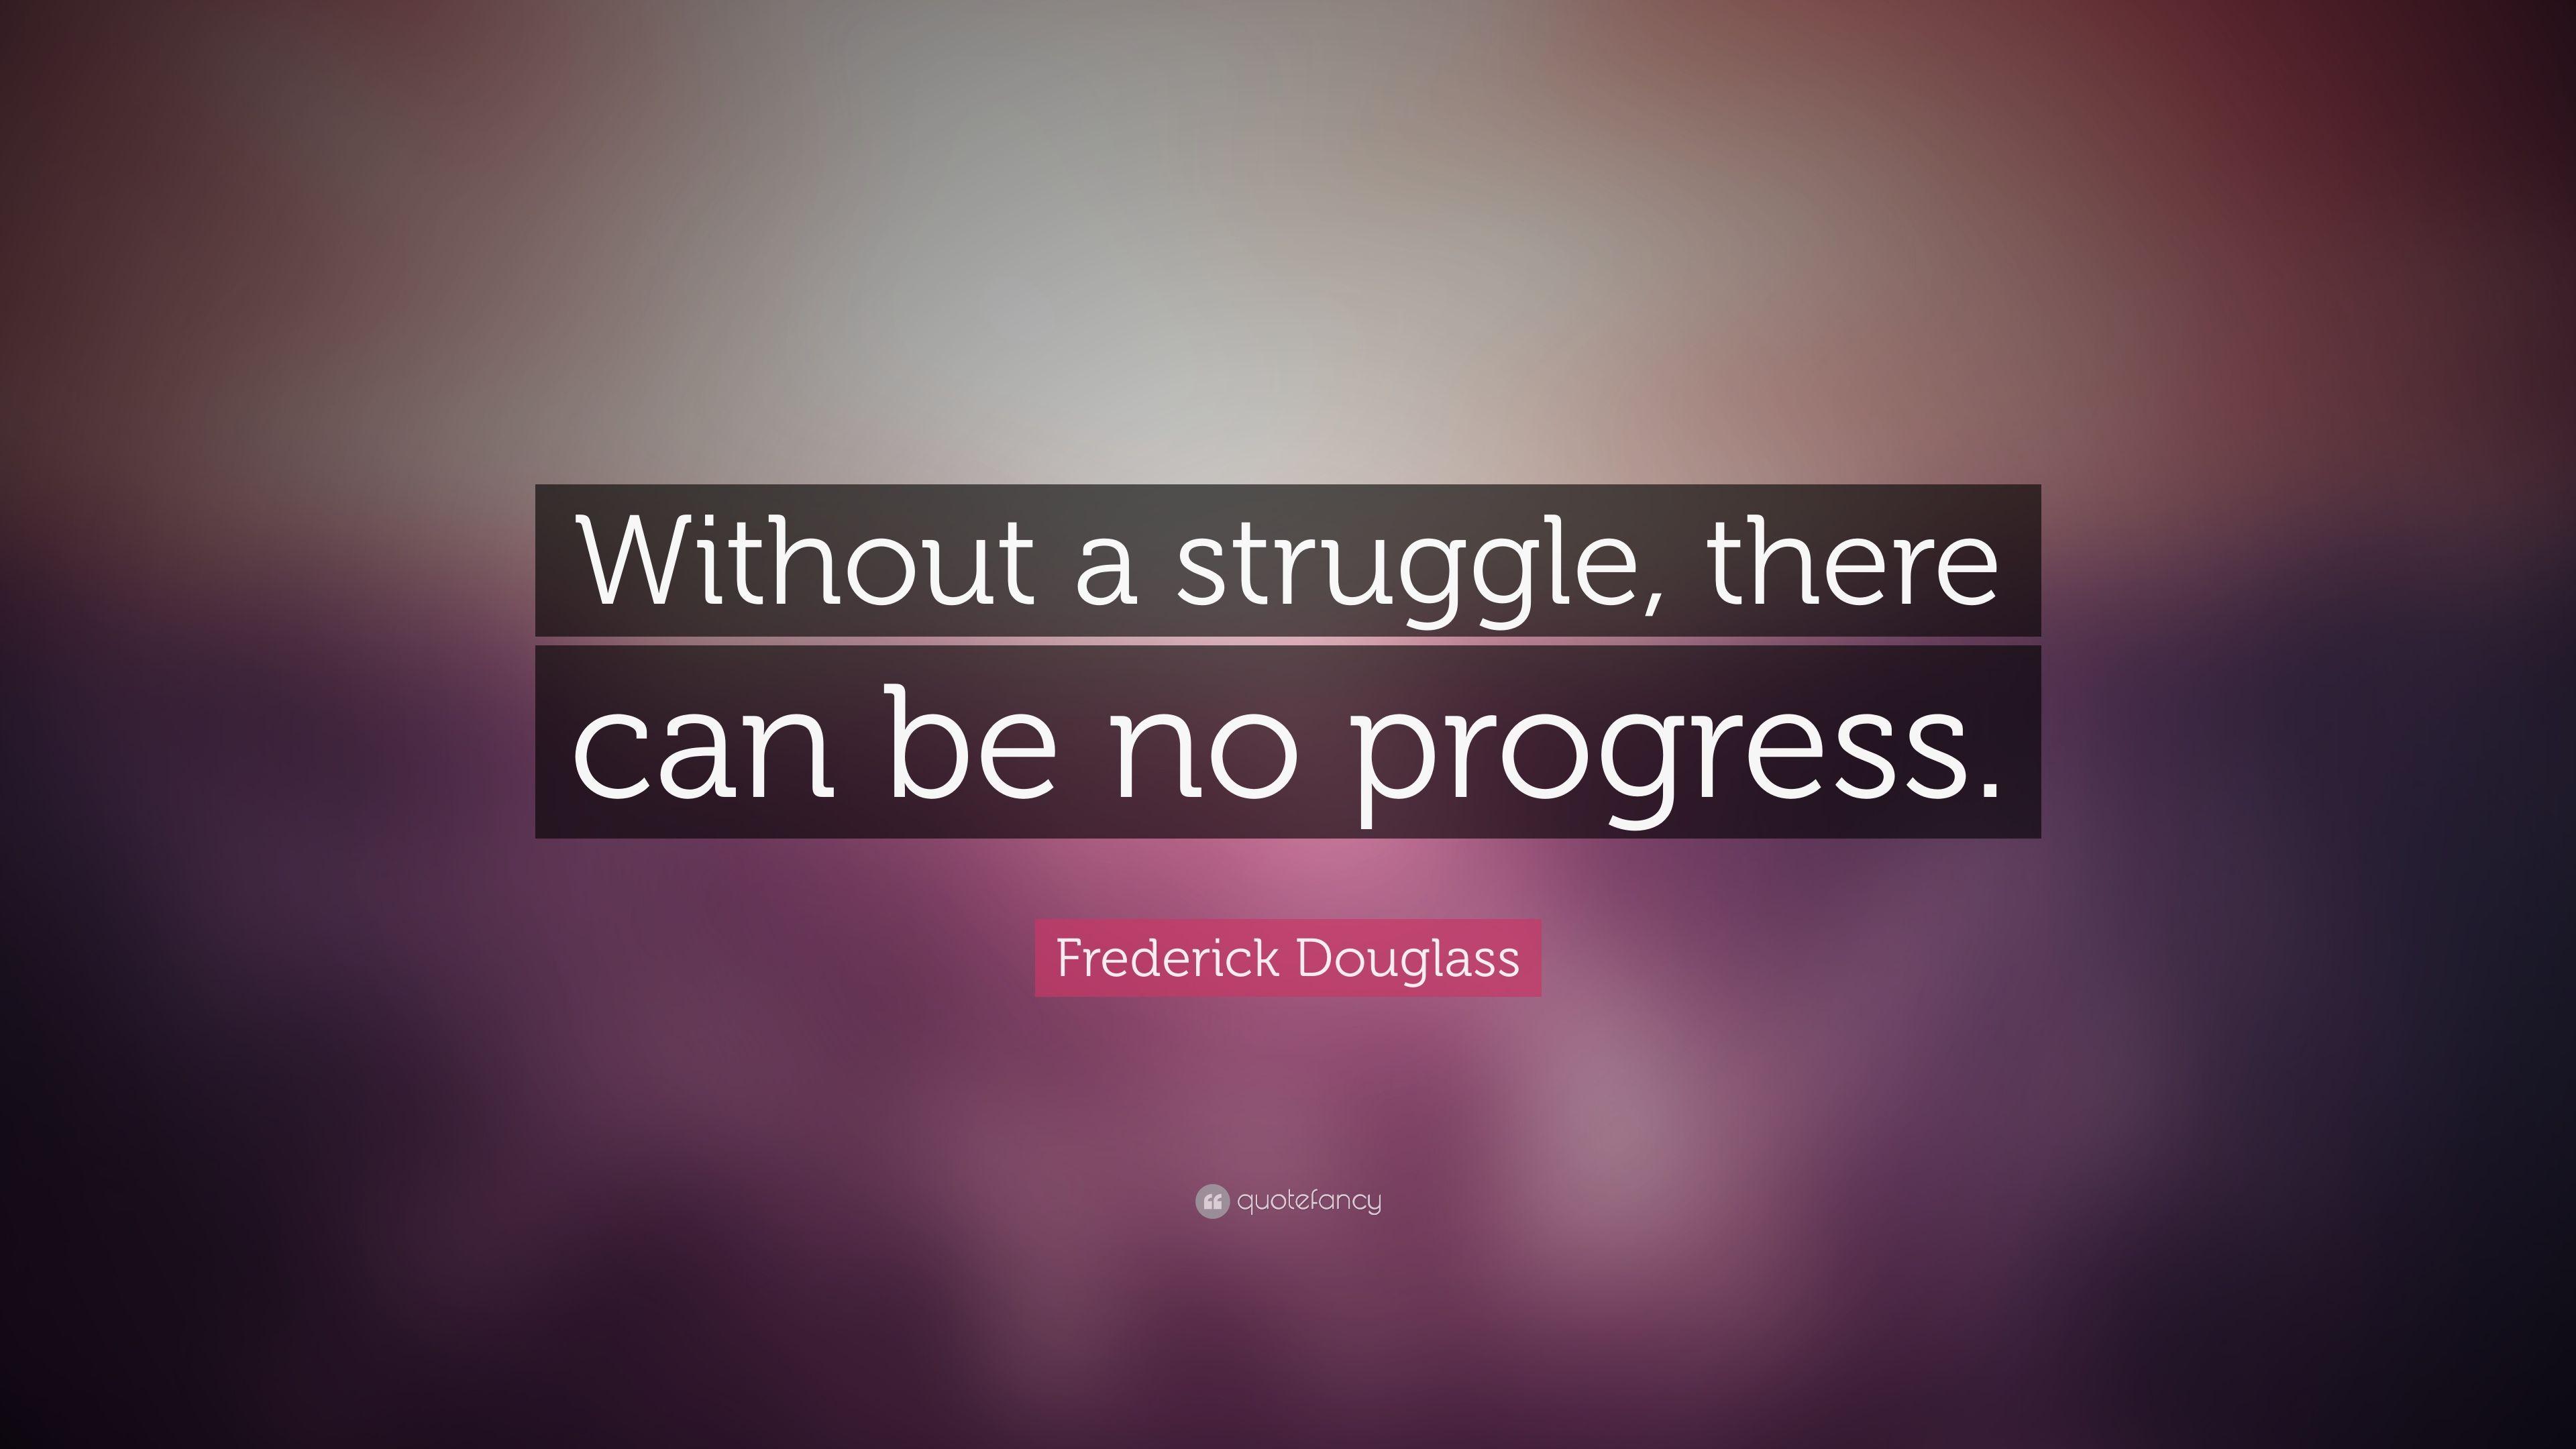 Frederick Douglass Quote: “Without a struggle, there can be no